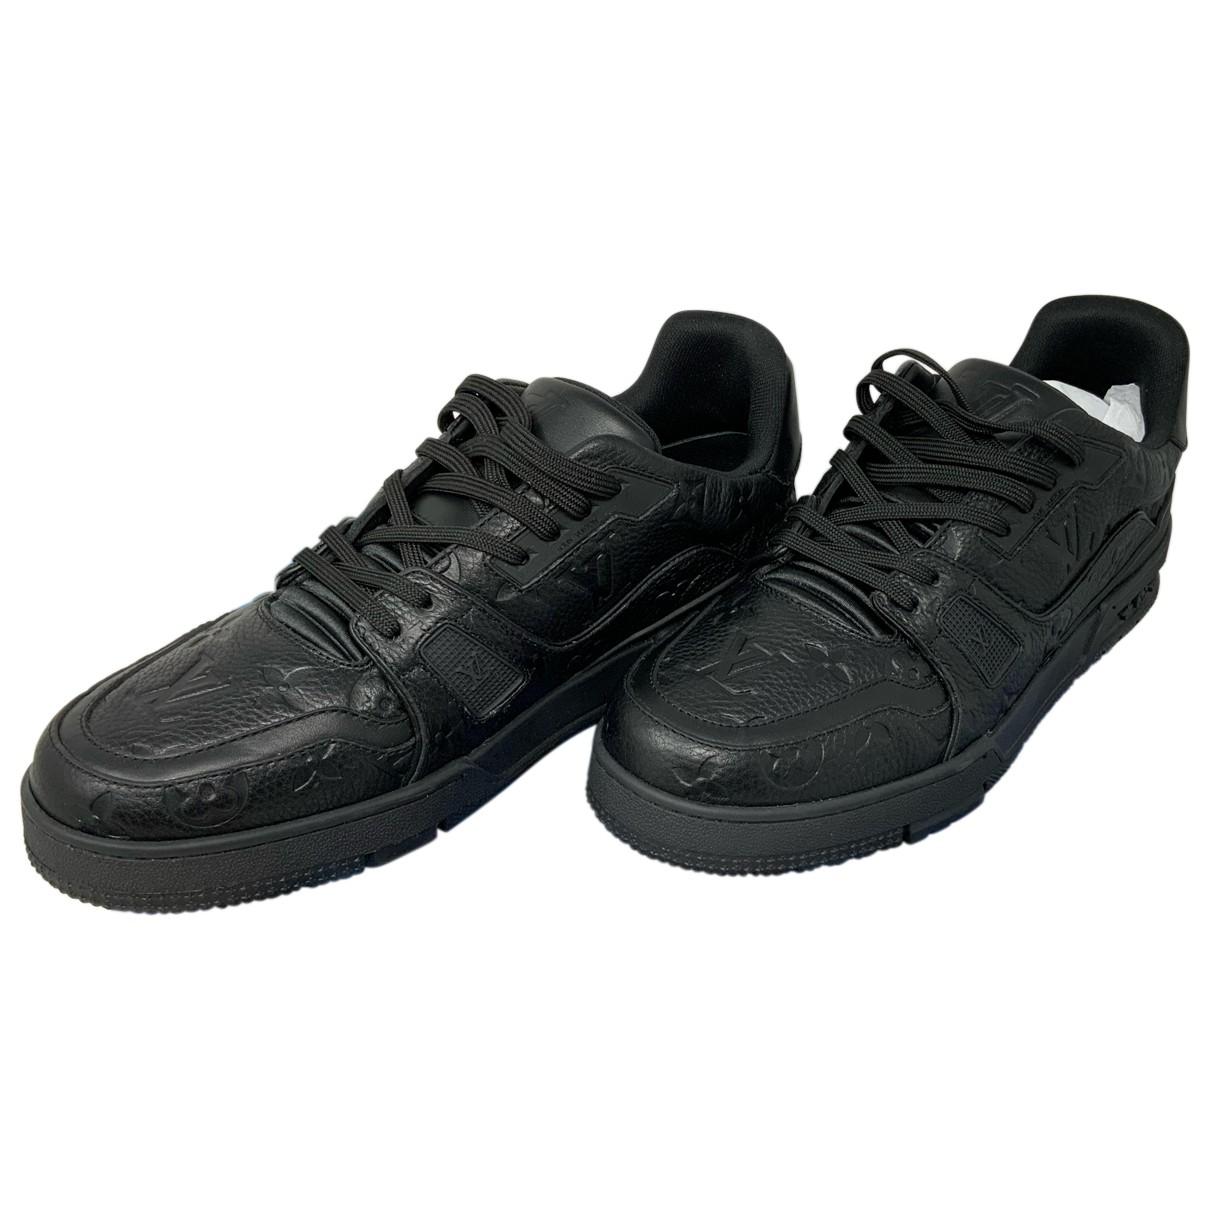 Lv trainer low trainers Louis Vuitton Black size 7 UK in Suede - 23977316